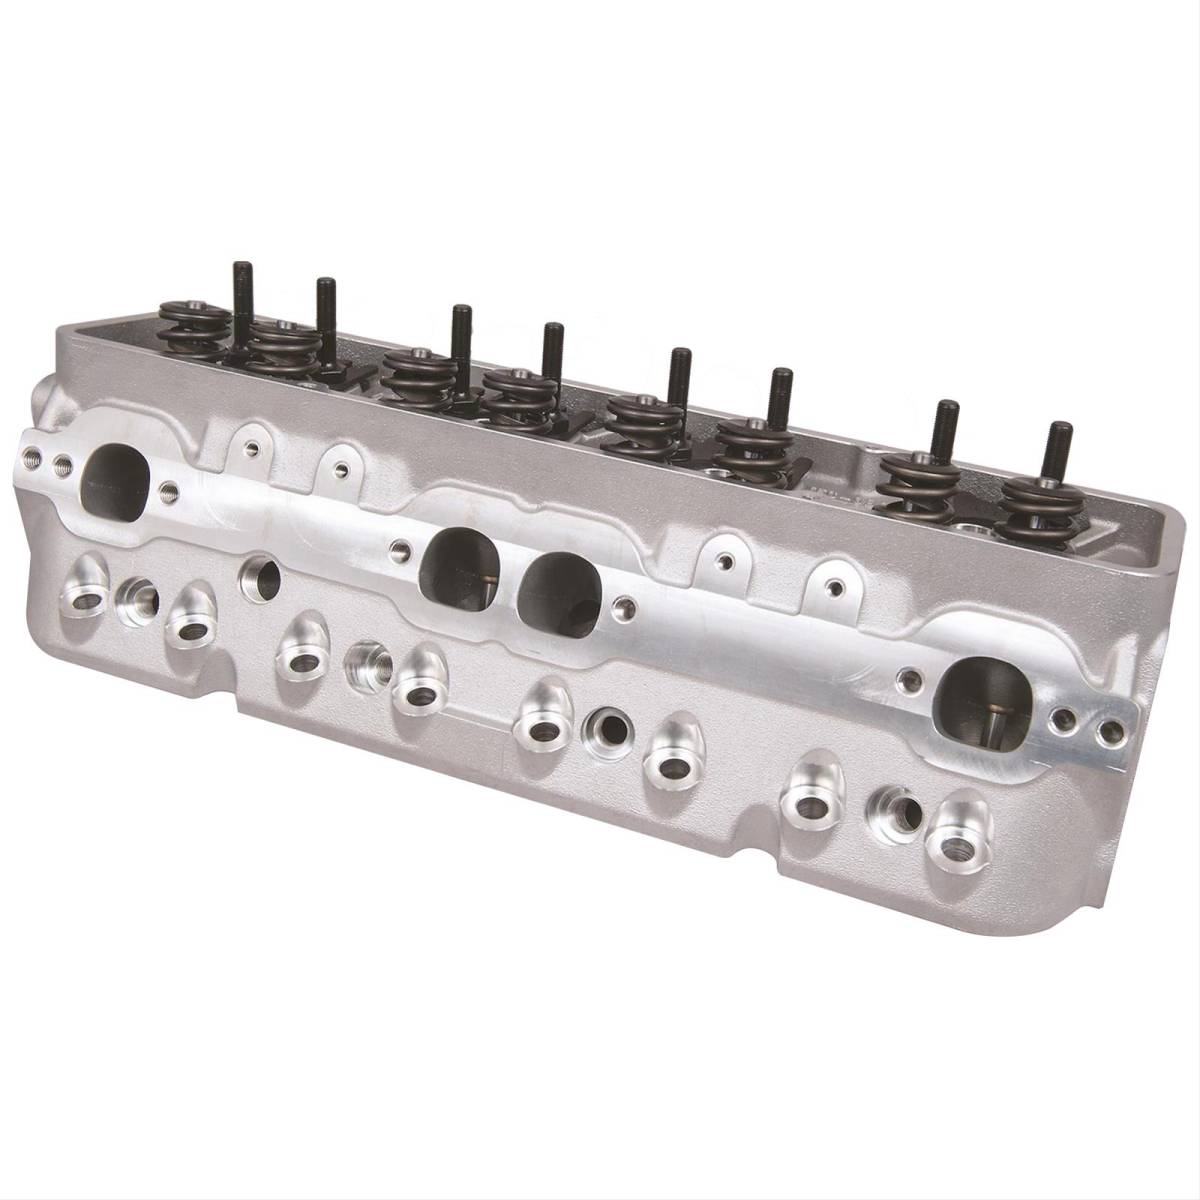 Trickflow - Trickflow Super 23 Cylinder Heads, SB Chevy, 195cc Intake, 64cc Chambers, 1.250" Springs, Center Bolt - Image 1